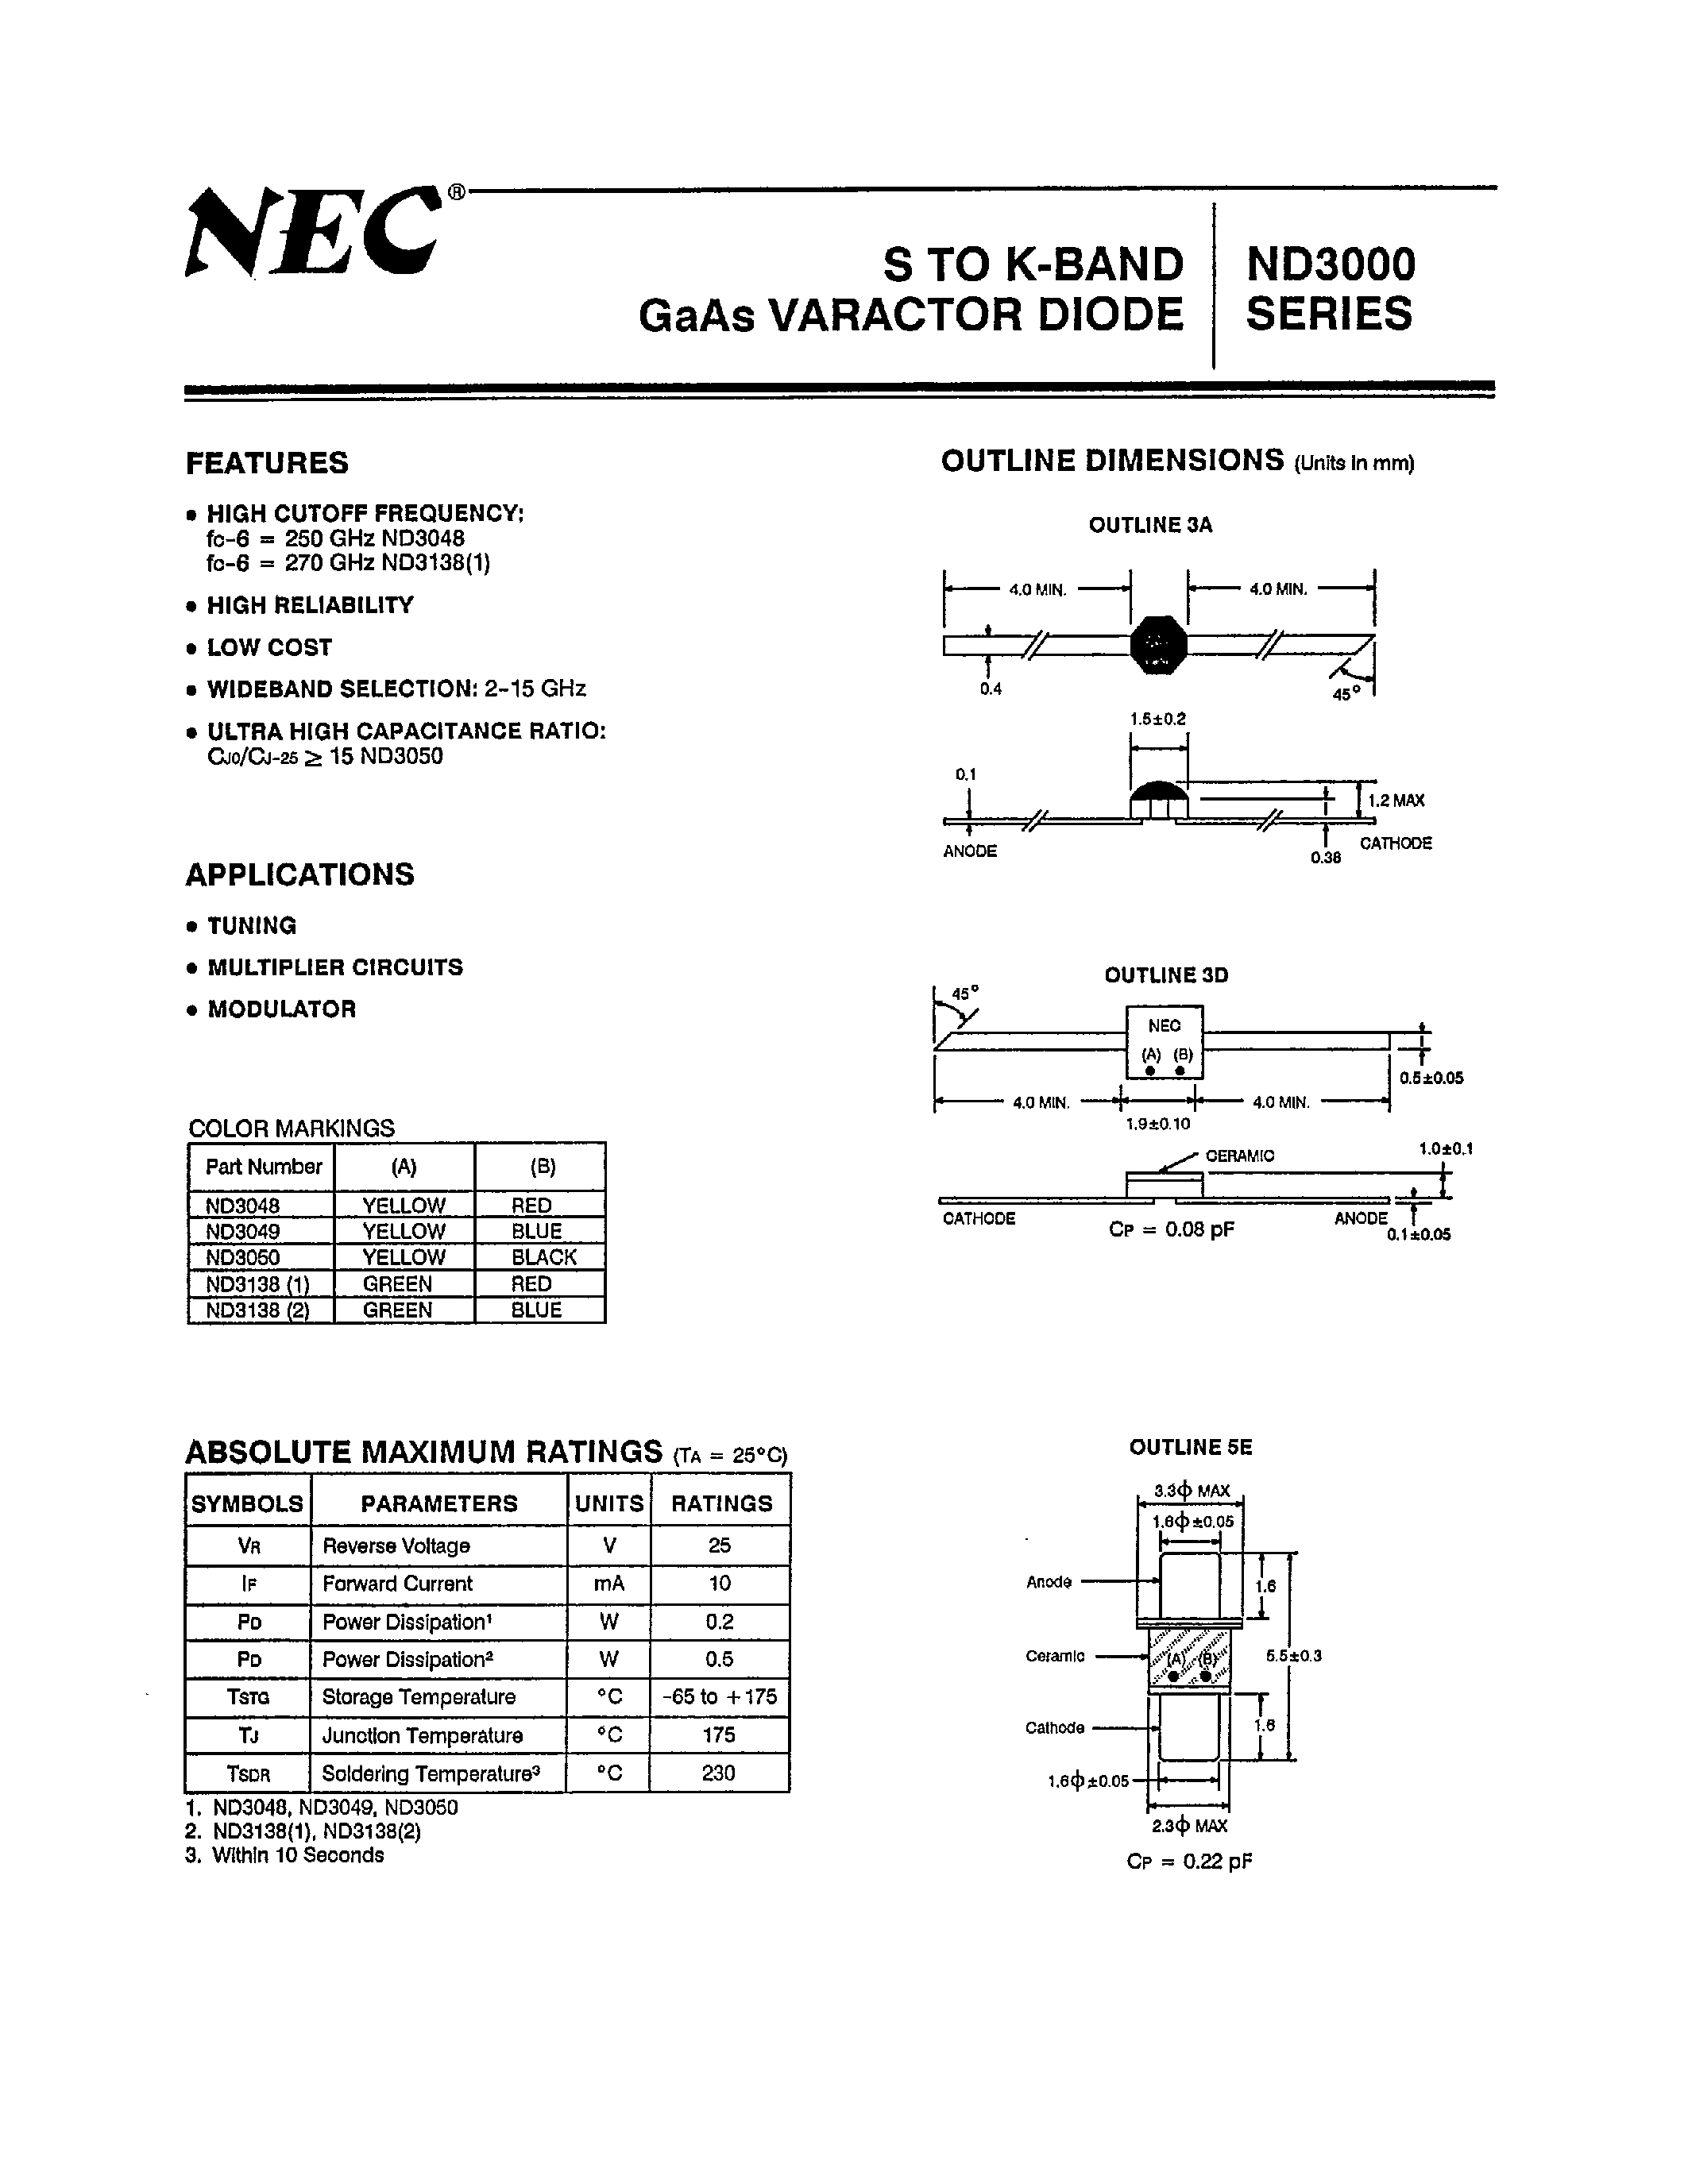 Datasheet ND3000 - S TO K-BAND GaAs VARACTOR DIODE page 1